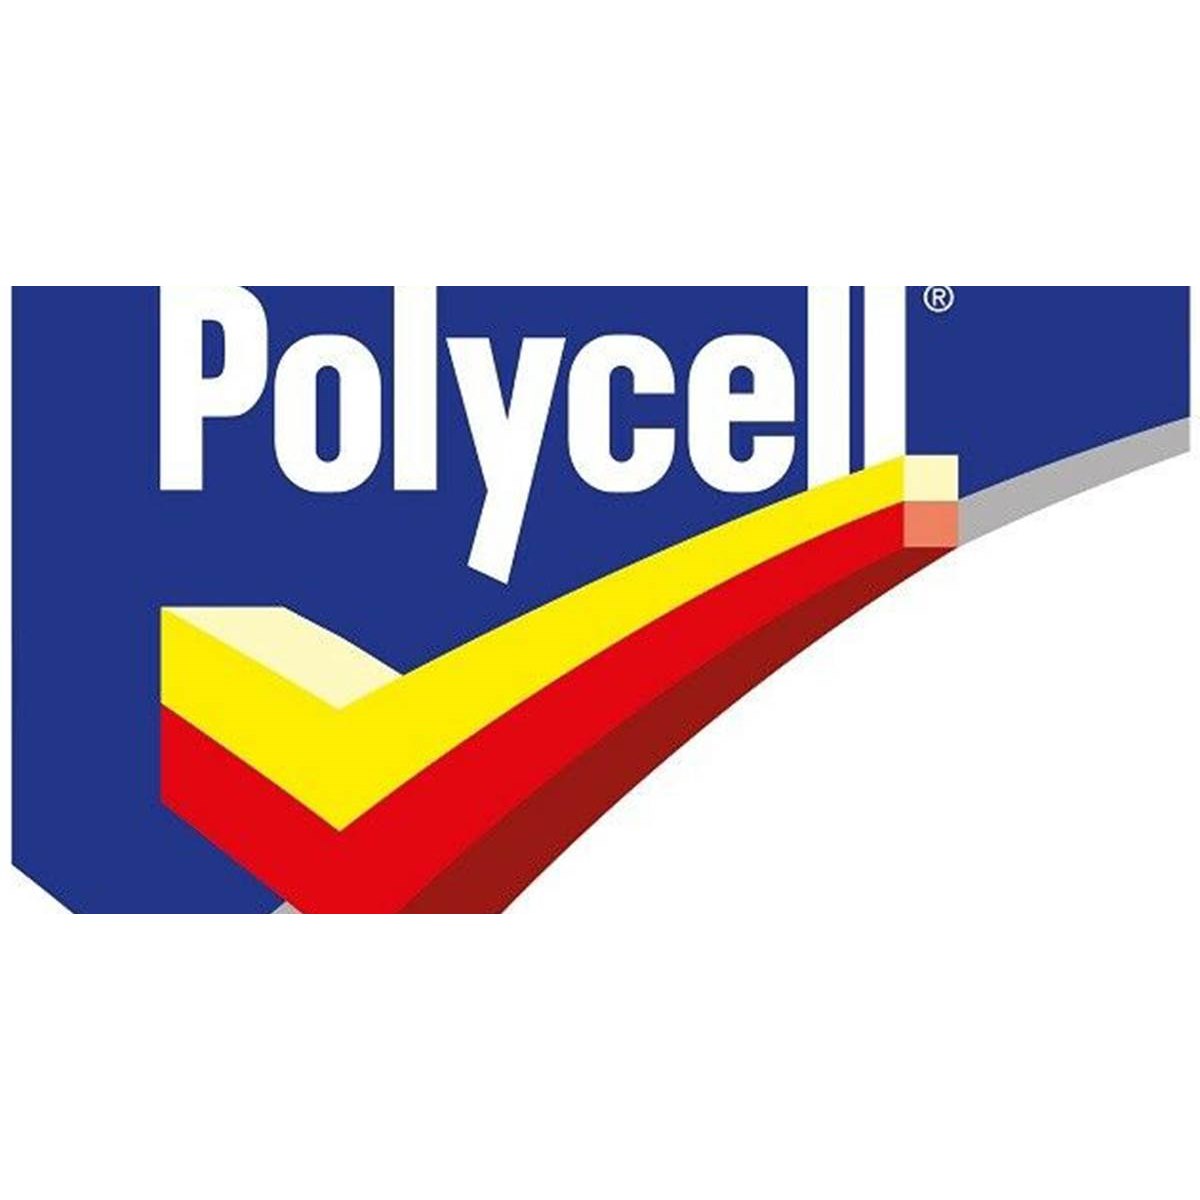 Where to Buy Polycell Products